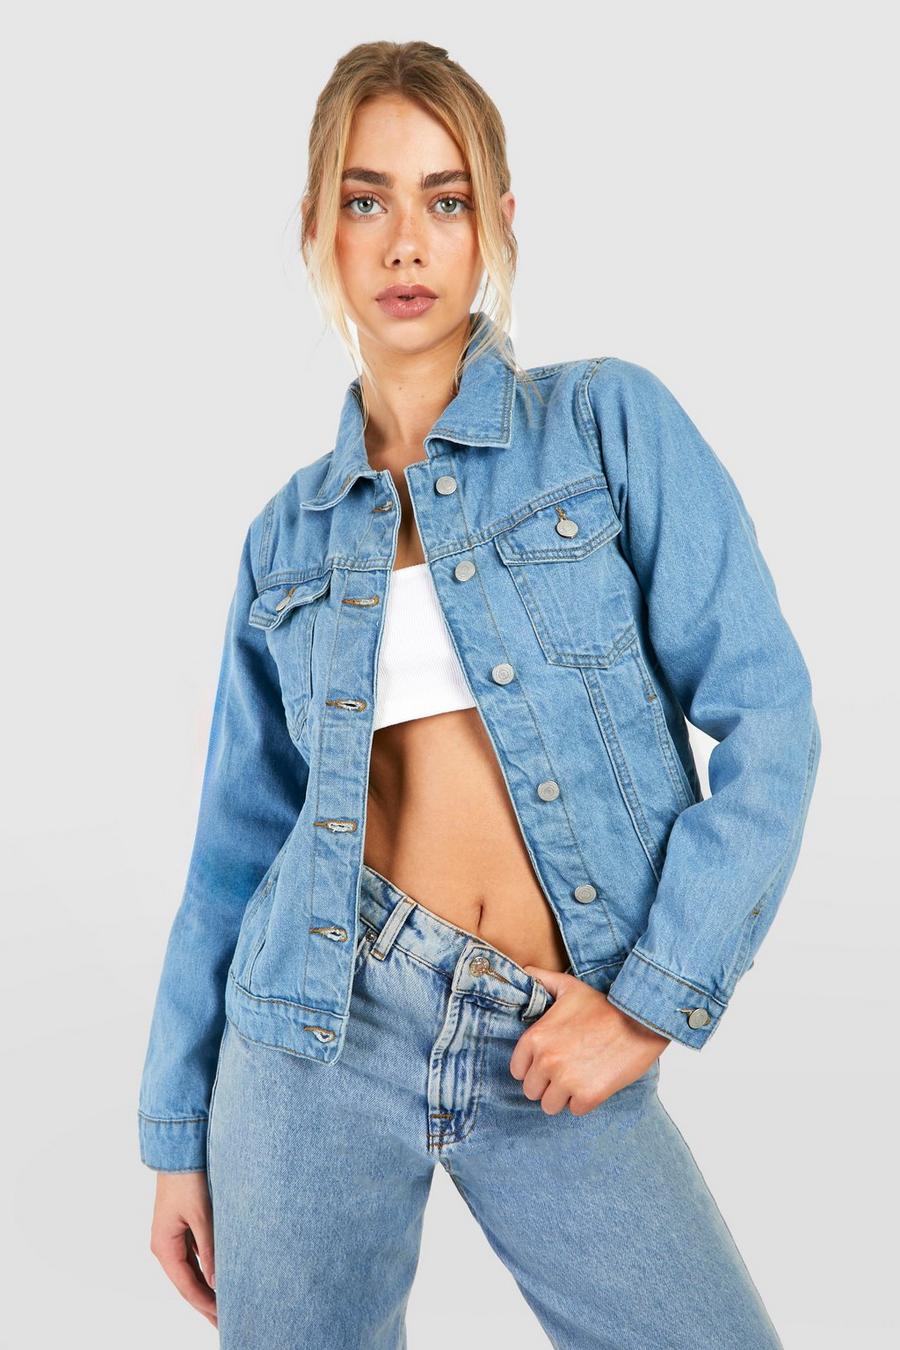 Premium Photo  Stylish woman in denim jacket and pink skirt with